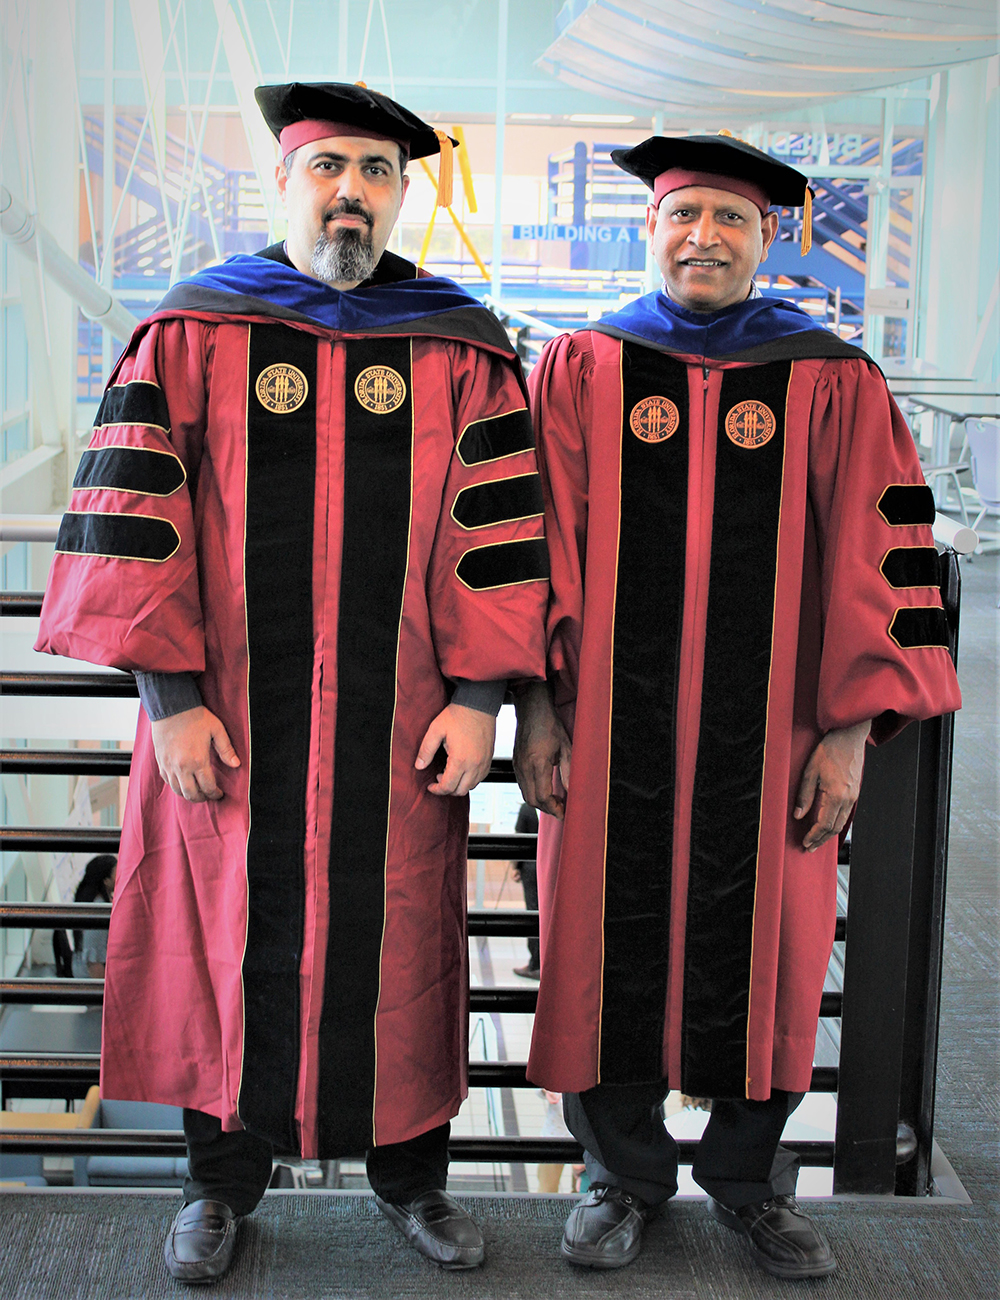 (L to R): Al-Taie and faculty advisor Sastry Pamidi, Ph.D., M.B.A. in his 2019 FSU doctoral regalia.